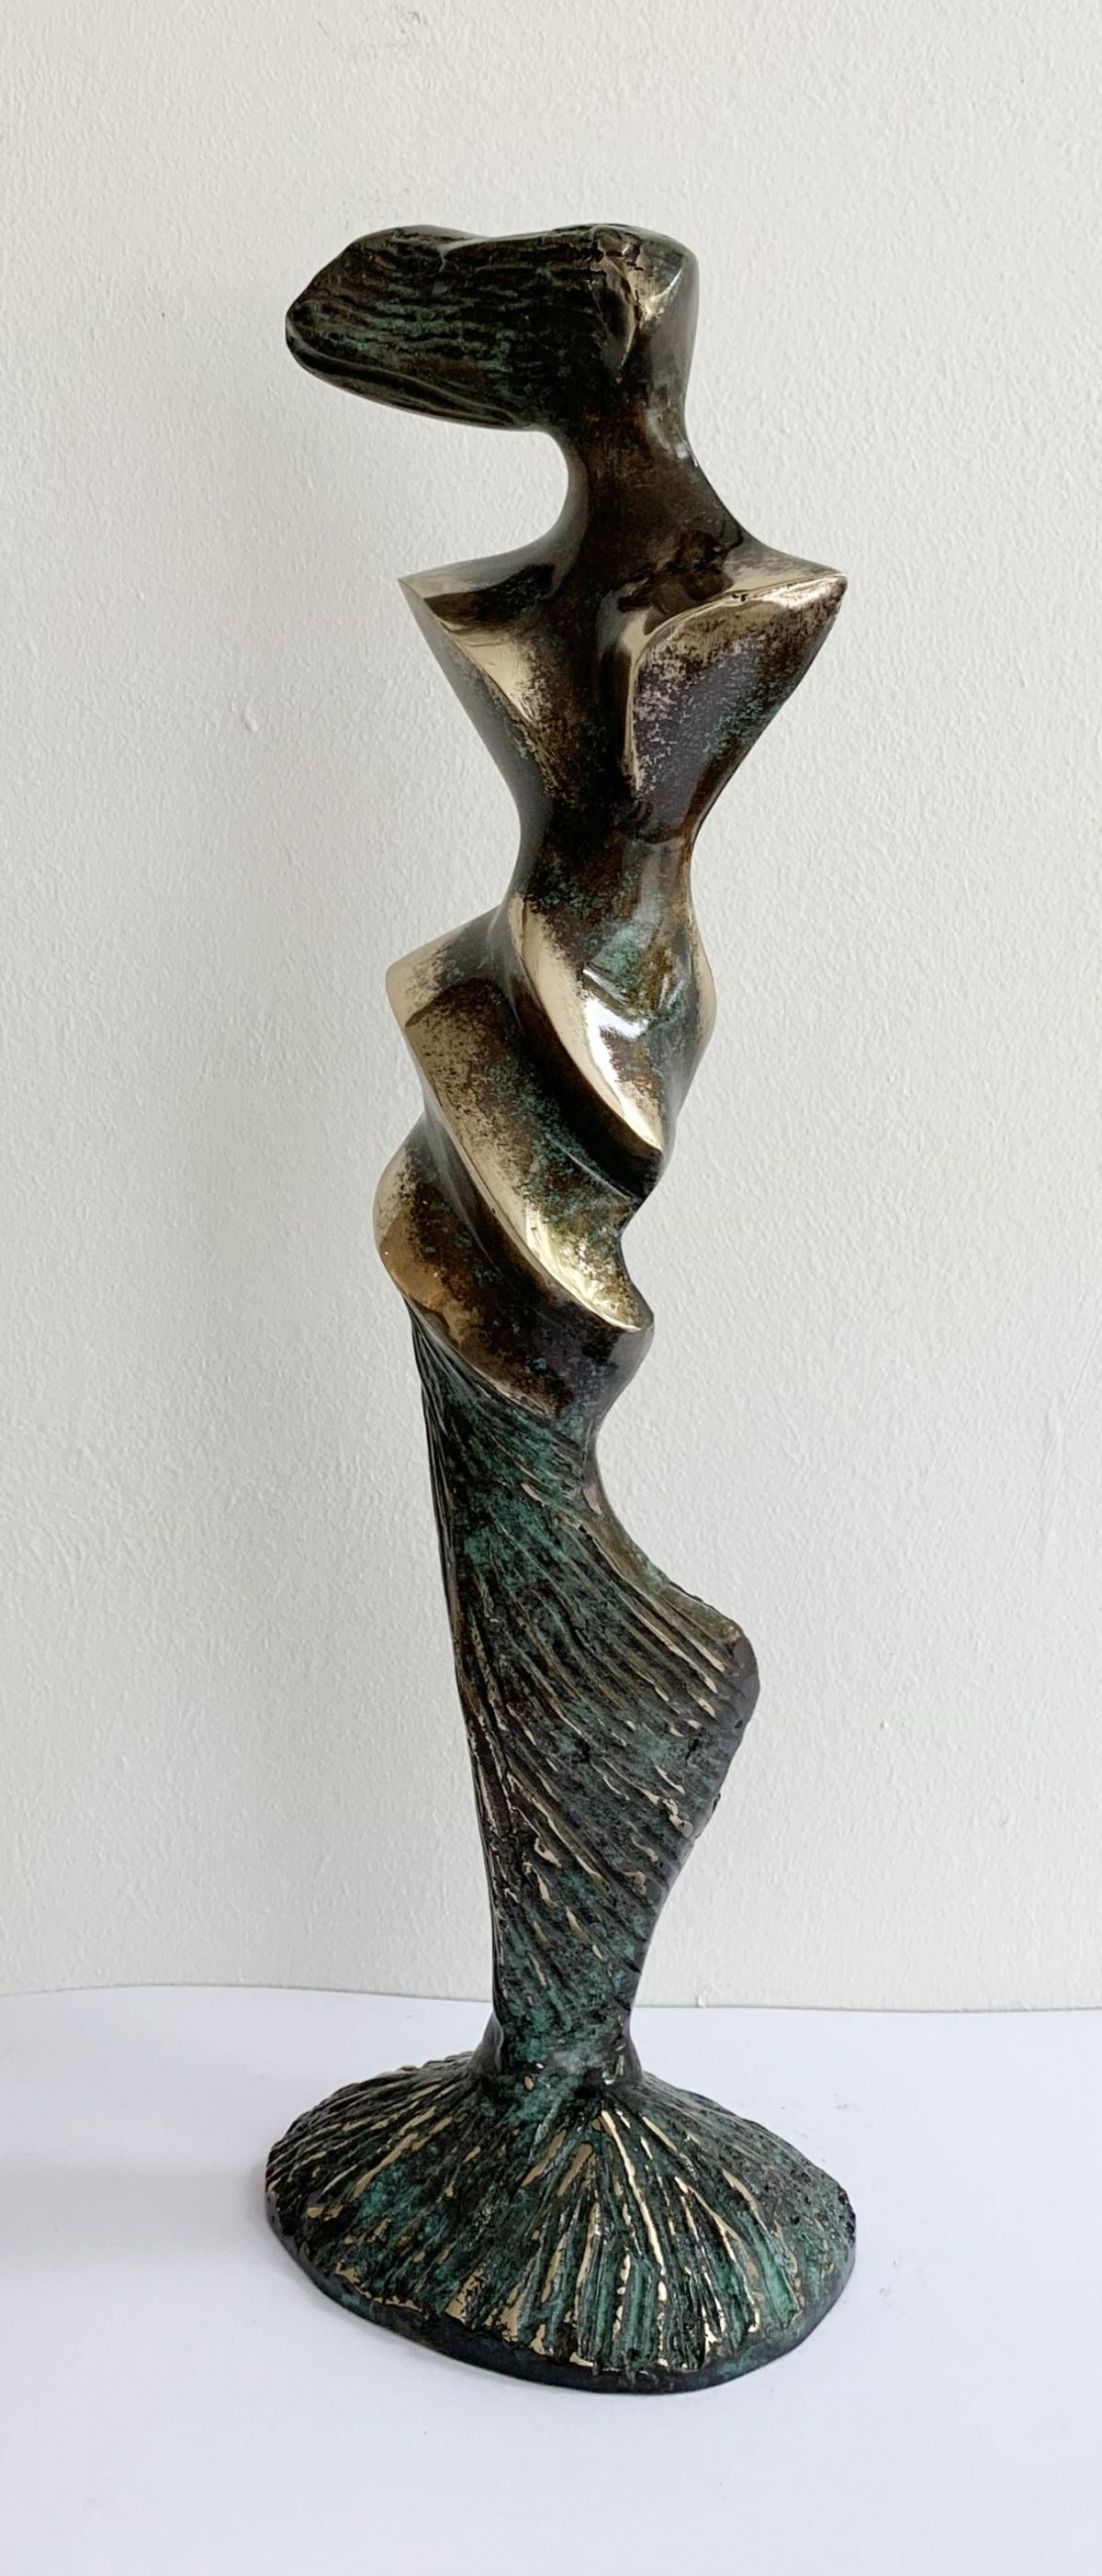 Dame V - XXI century Contemporary bronze sculpture, Abstract & figurative - Sculpture by Stanisław Wysocki